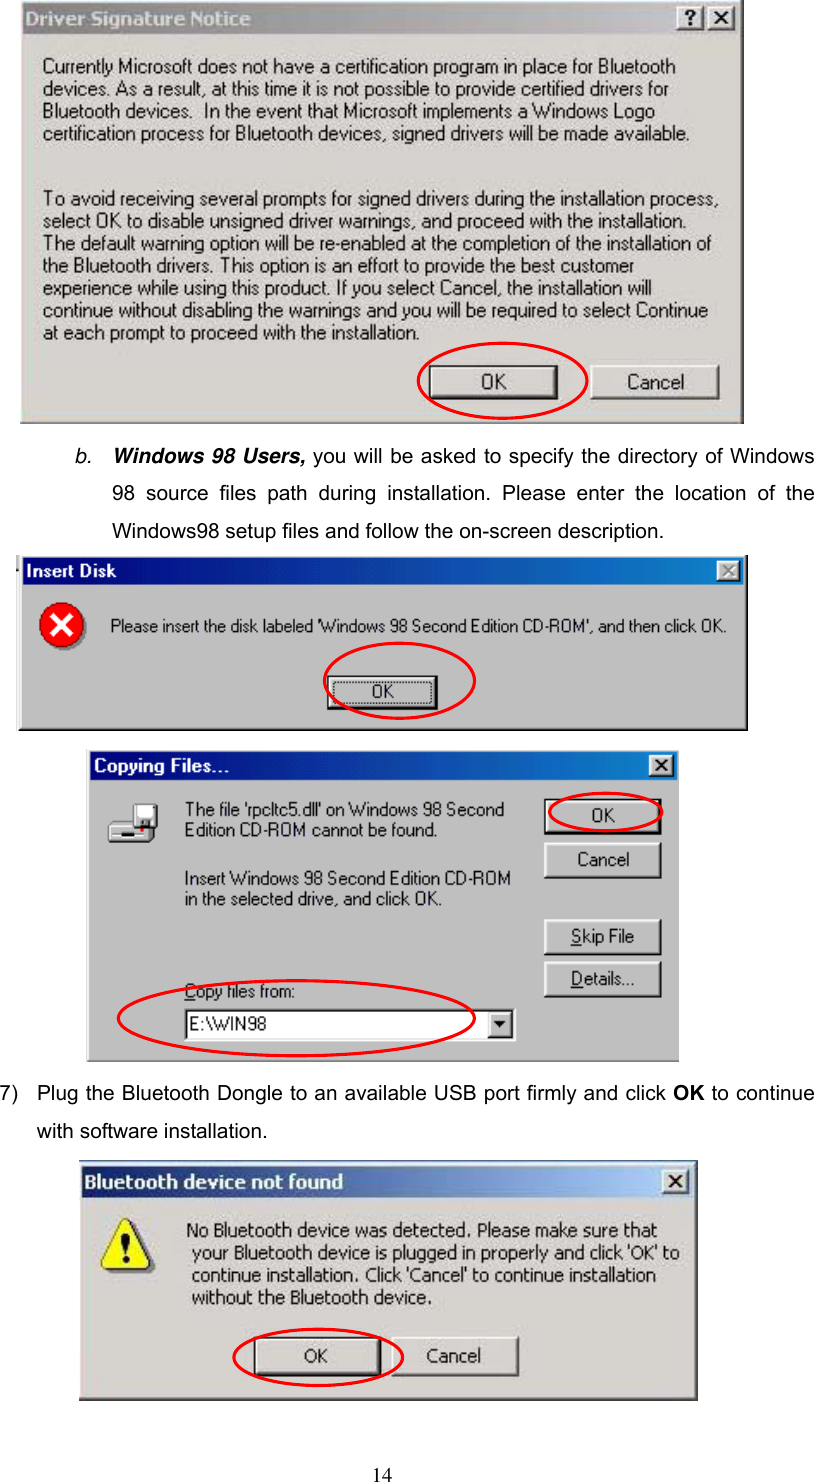  b.  Windows 98 Users, you will be asked to specify the directory of Windows 98 source files path during installation. Please enter the location of the Windows98 setup files and follow the on-screen description.   7)  Plug the Bluetooth Dongle to an available USB port firmly and click OK to continue with software installation.   14 